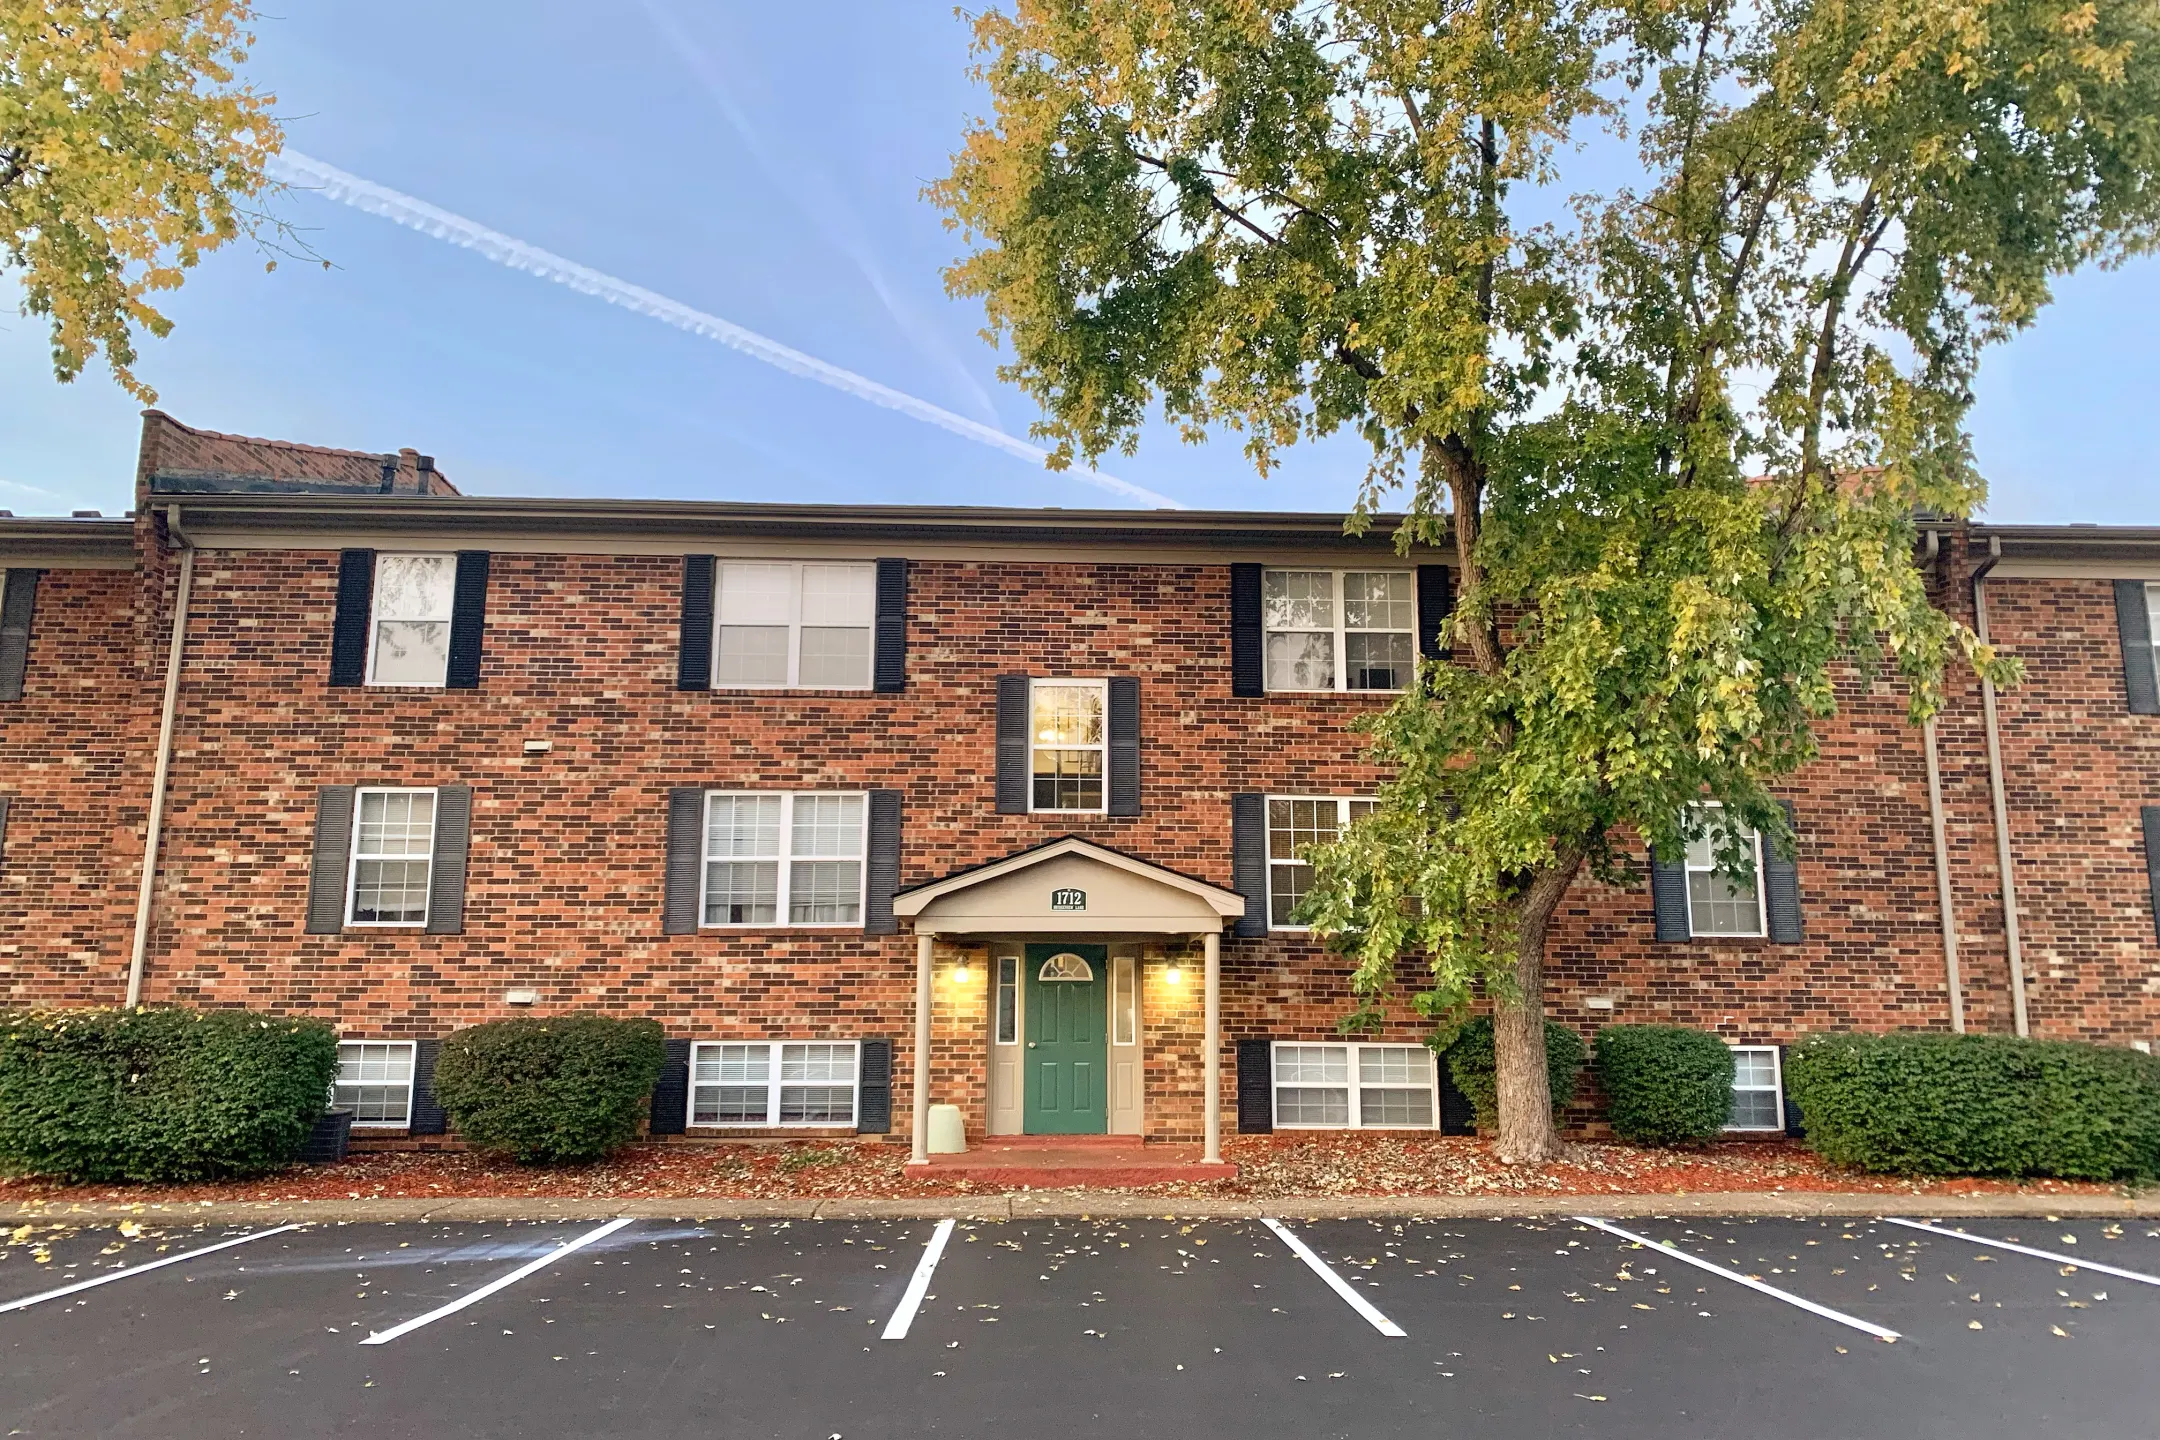 Building - Countrybrook Apartments - Louisville, KY